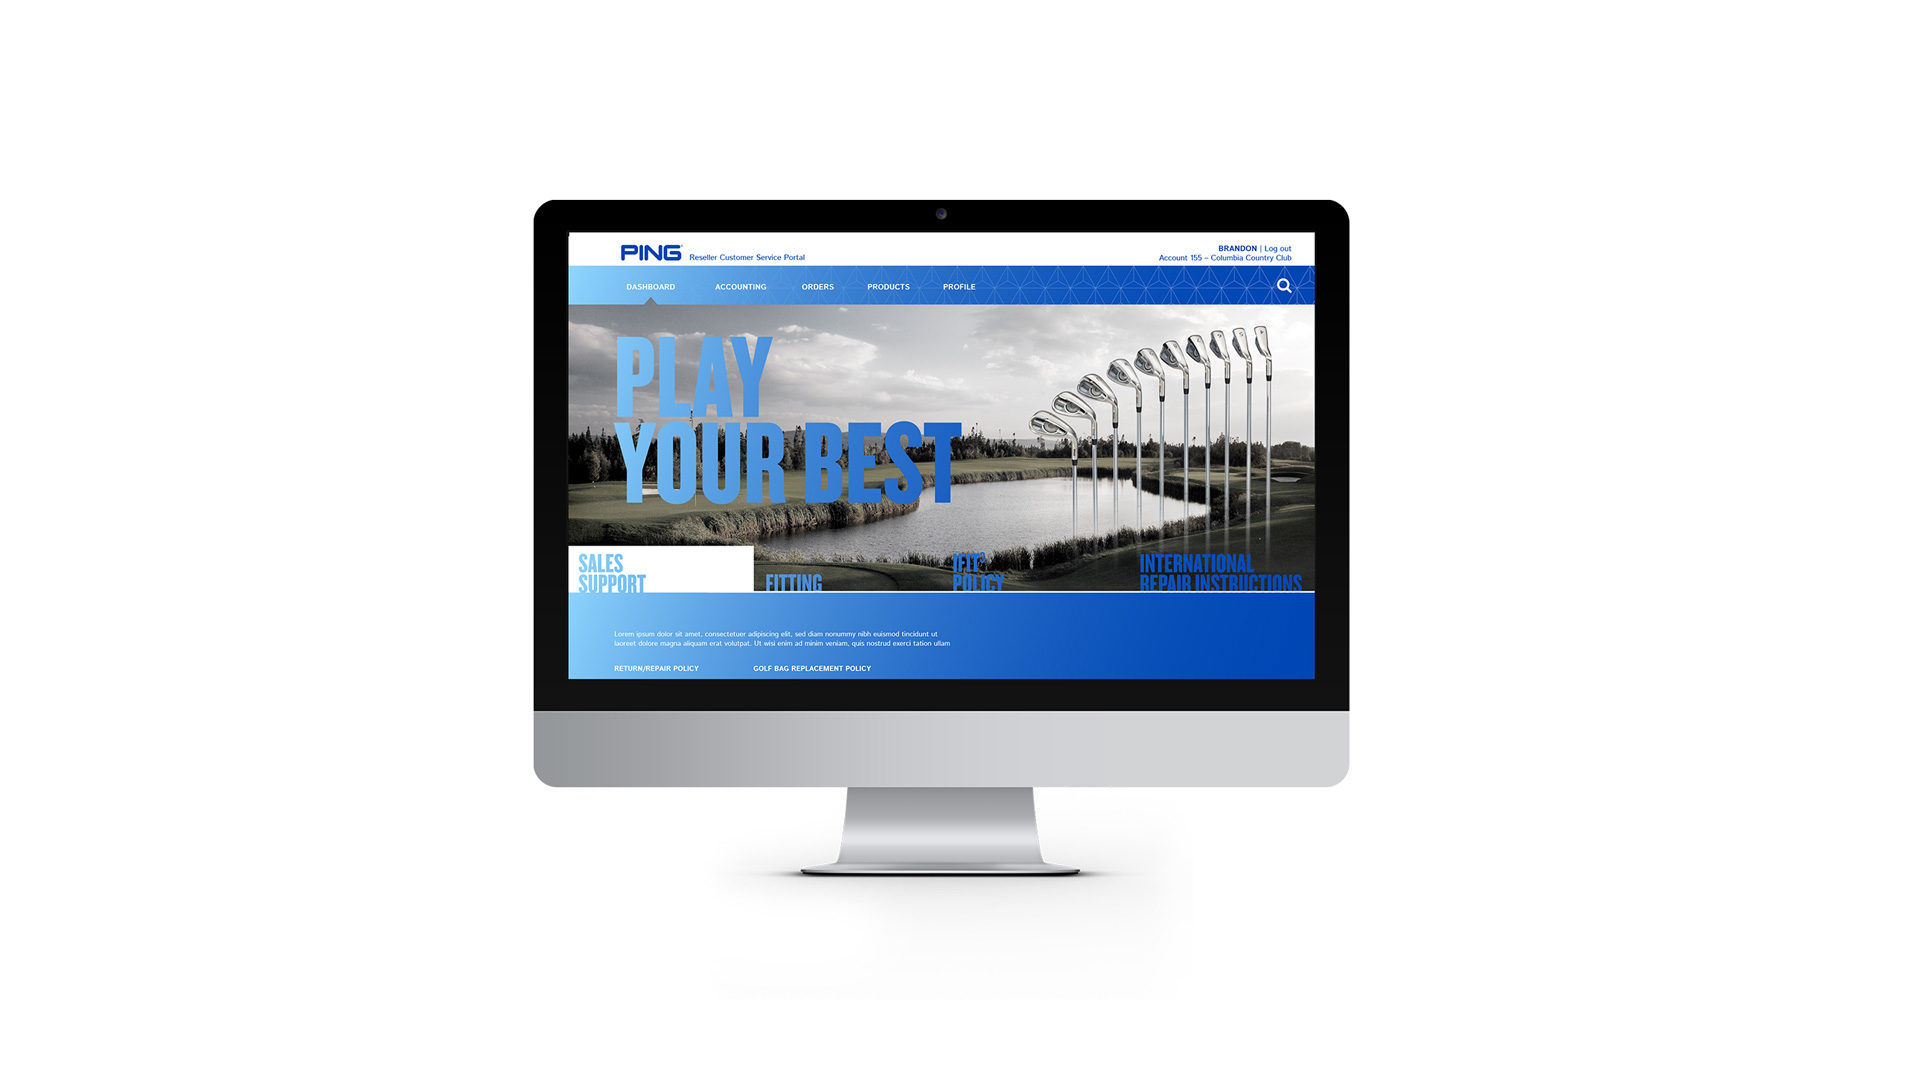 Ping portal redesign homepage